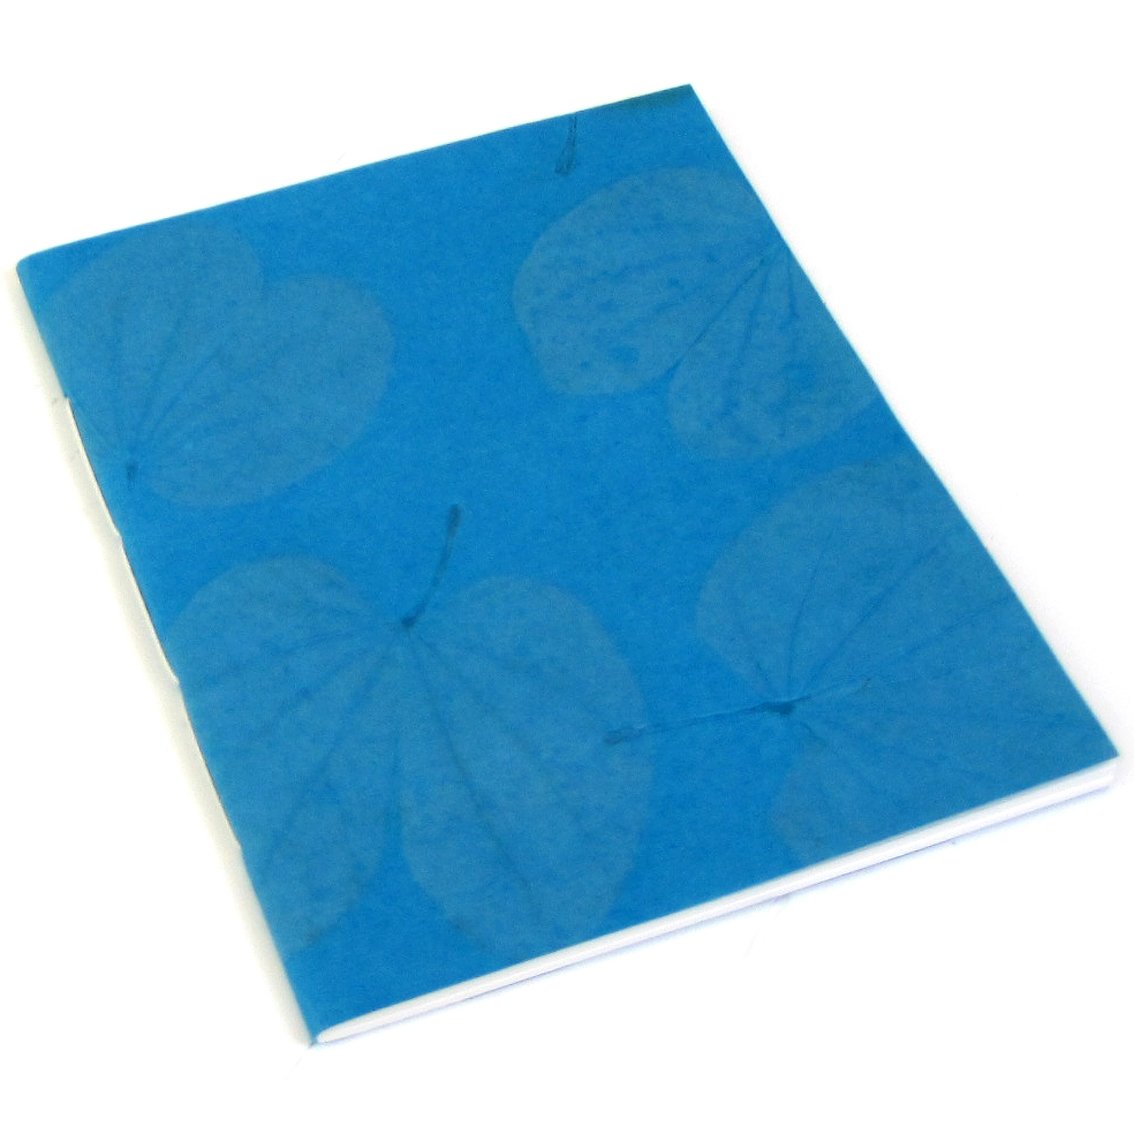 Journal guest book natural leaf diary sketching notebook handmade paper craft teal 7x8 50pp